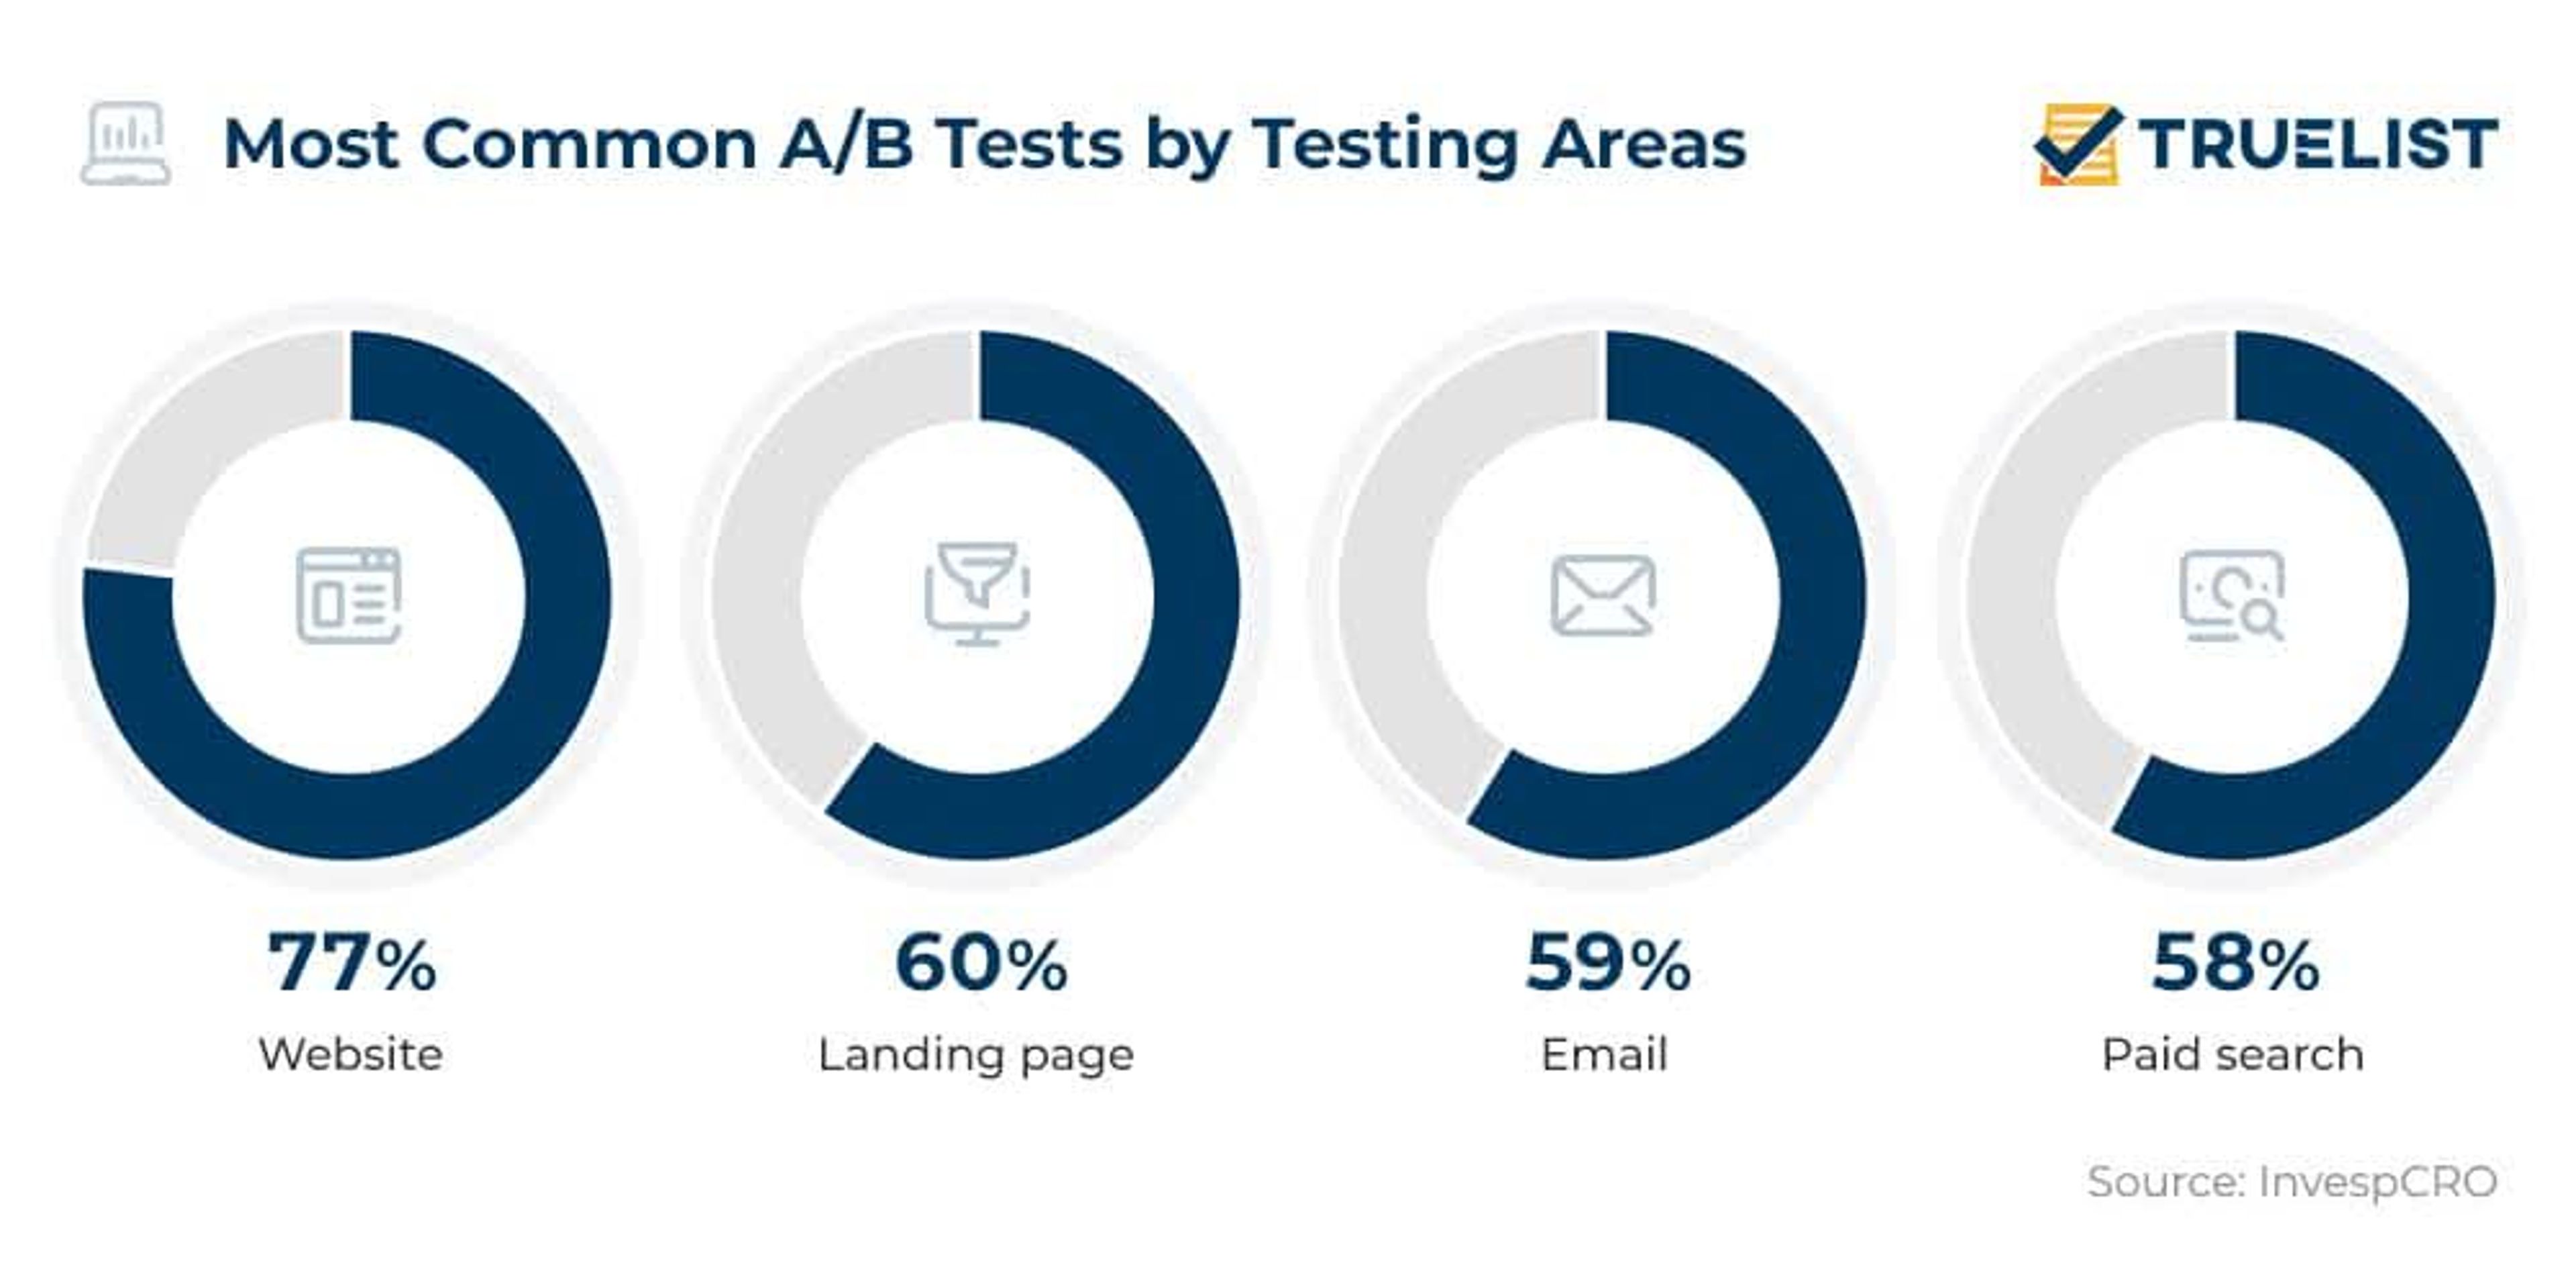 Most common A/B tests by testing areas